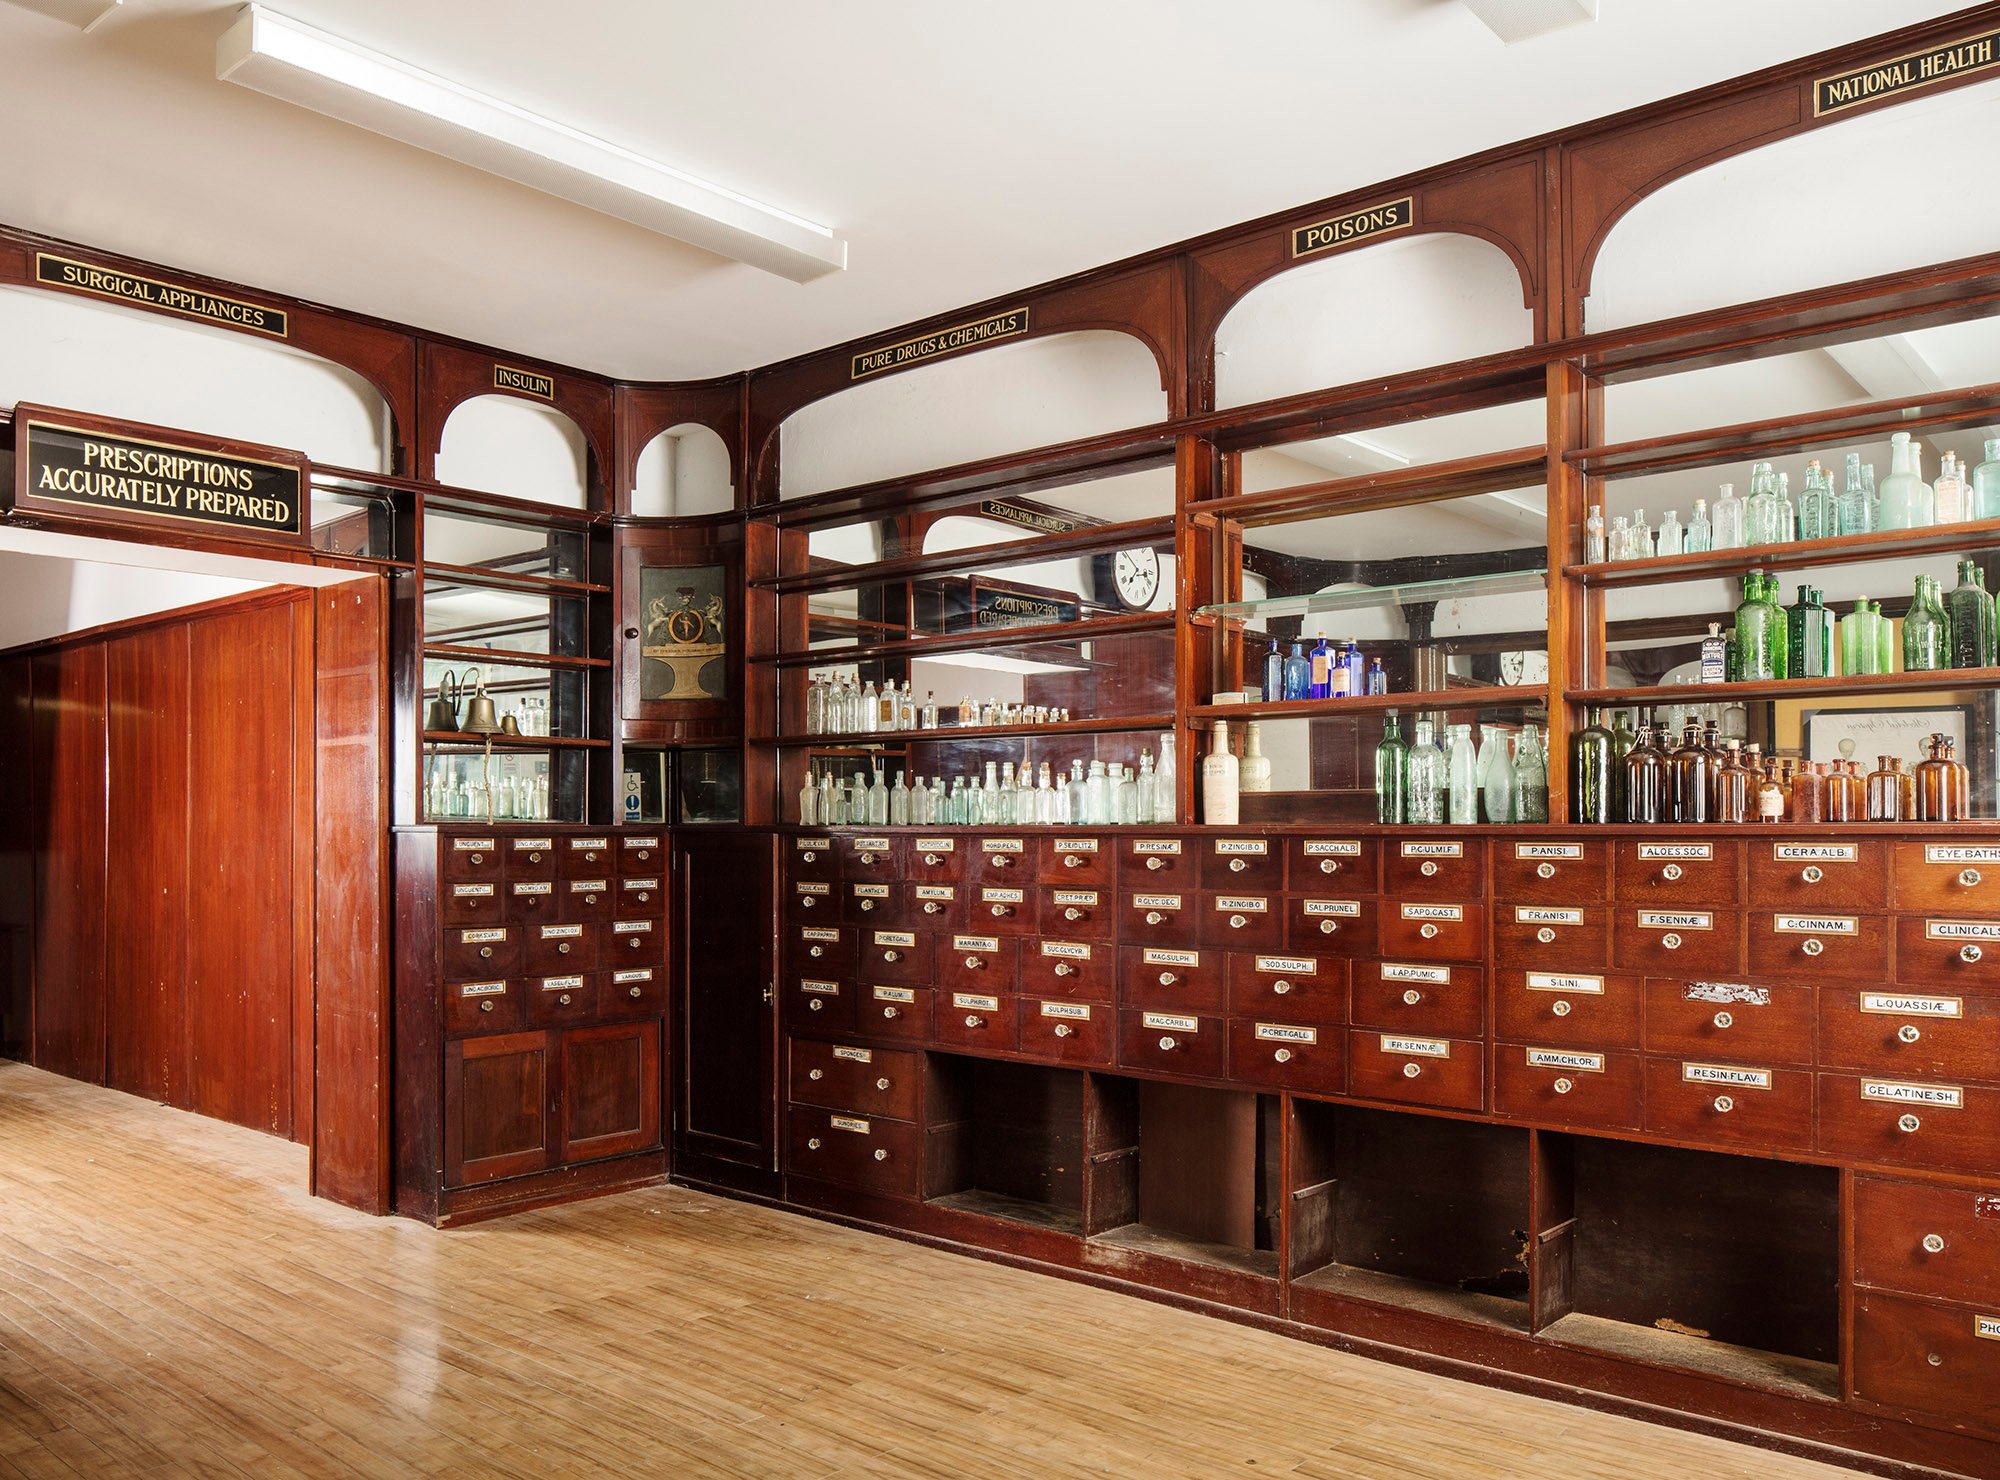 Interior of chemist shop with original drawers and shelves